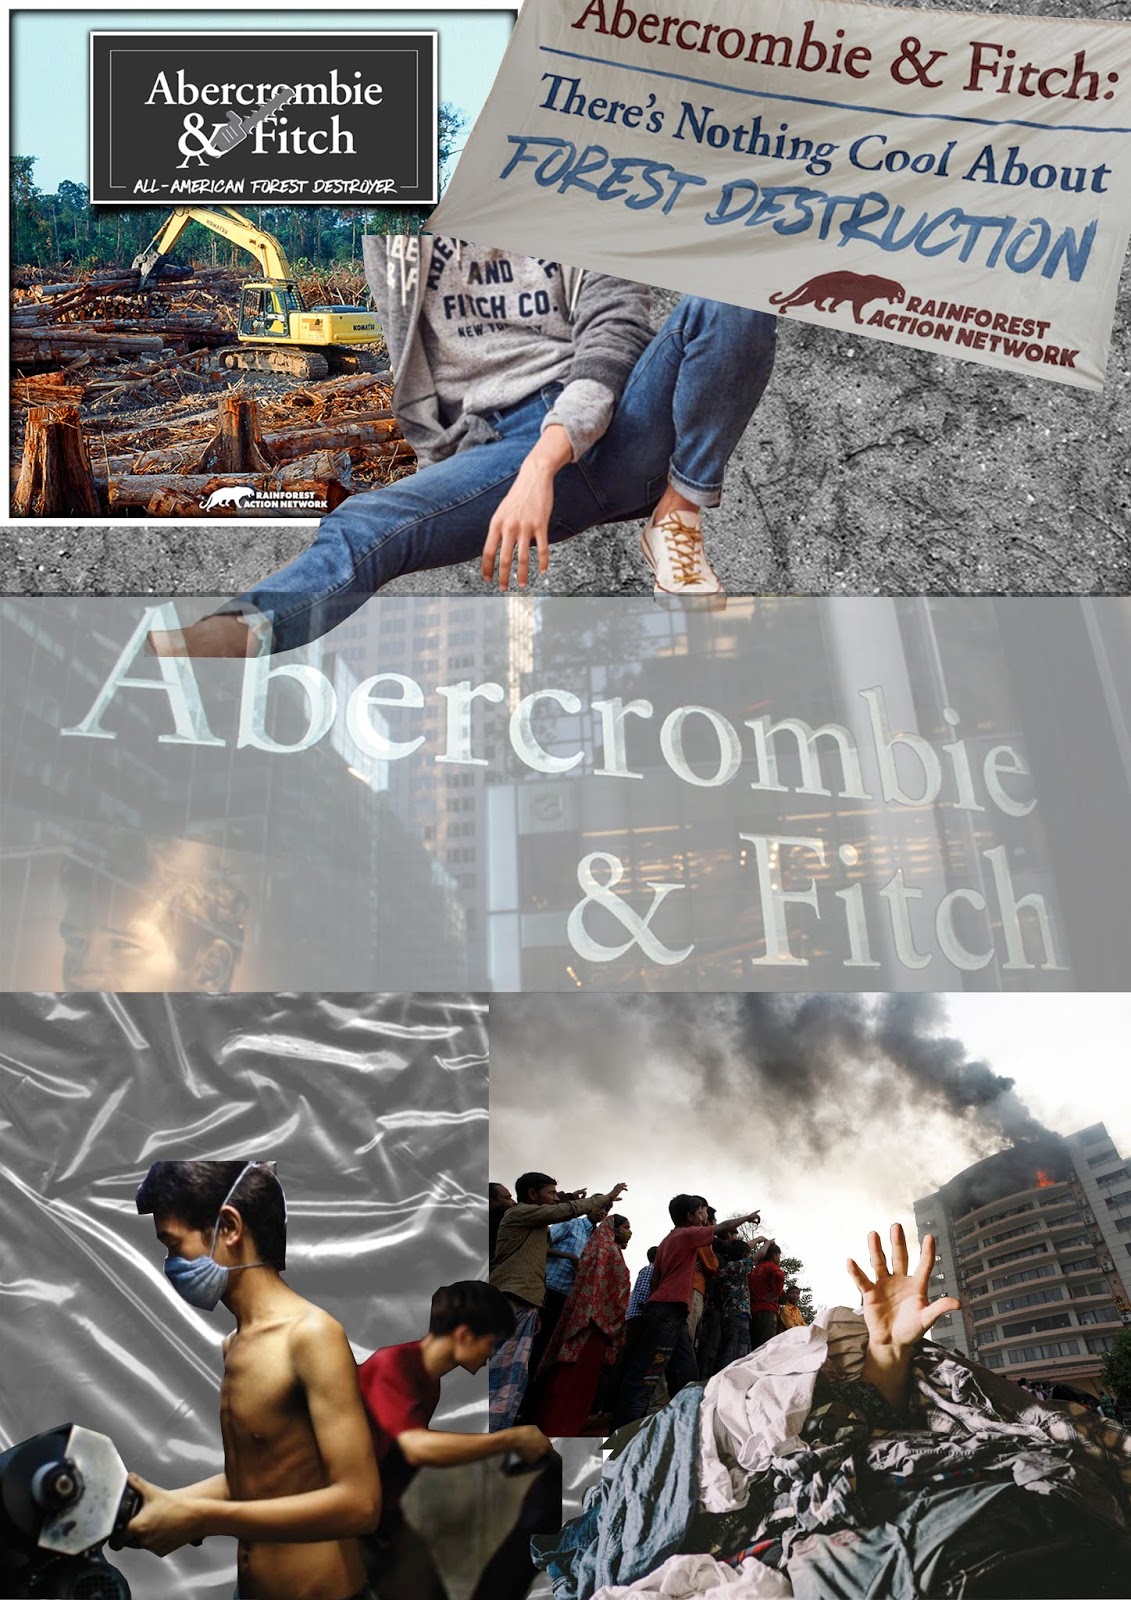 abercrombie and fitch ethical issues